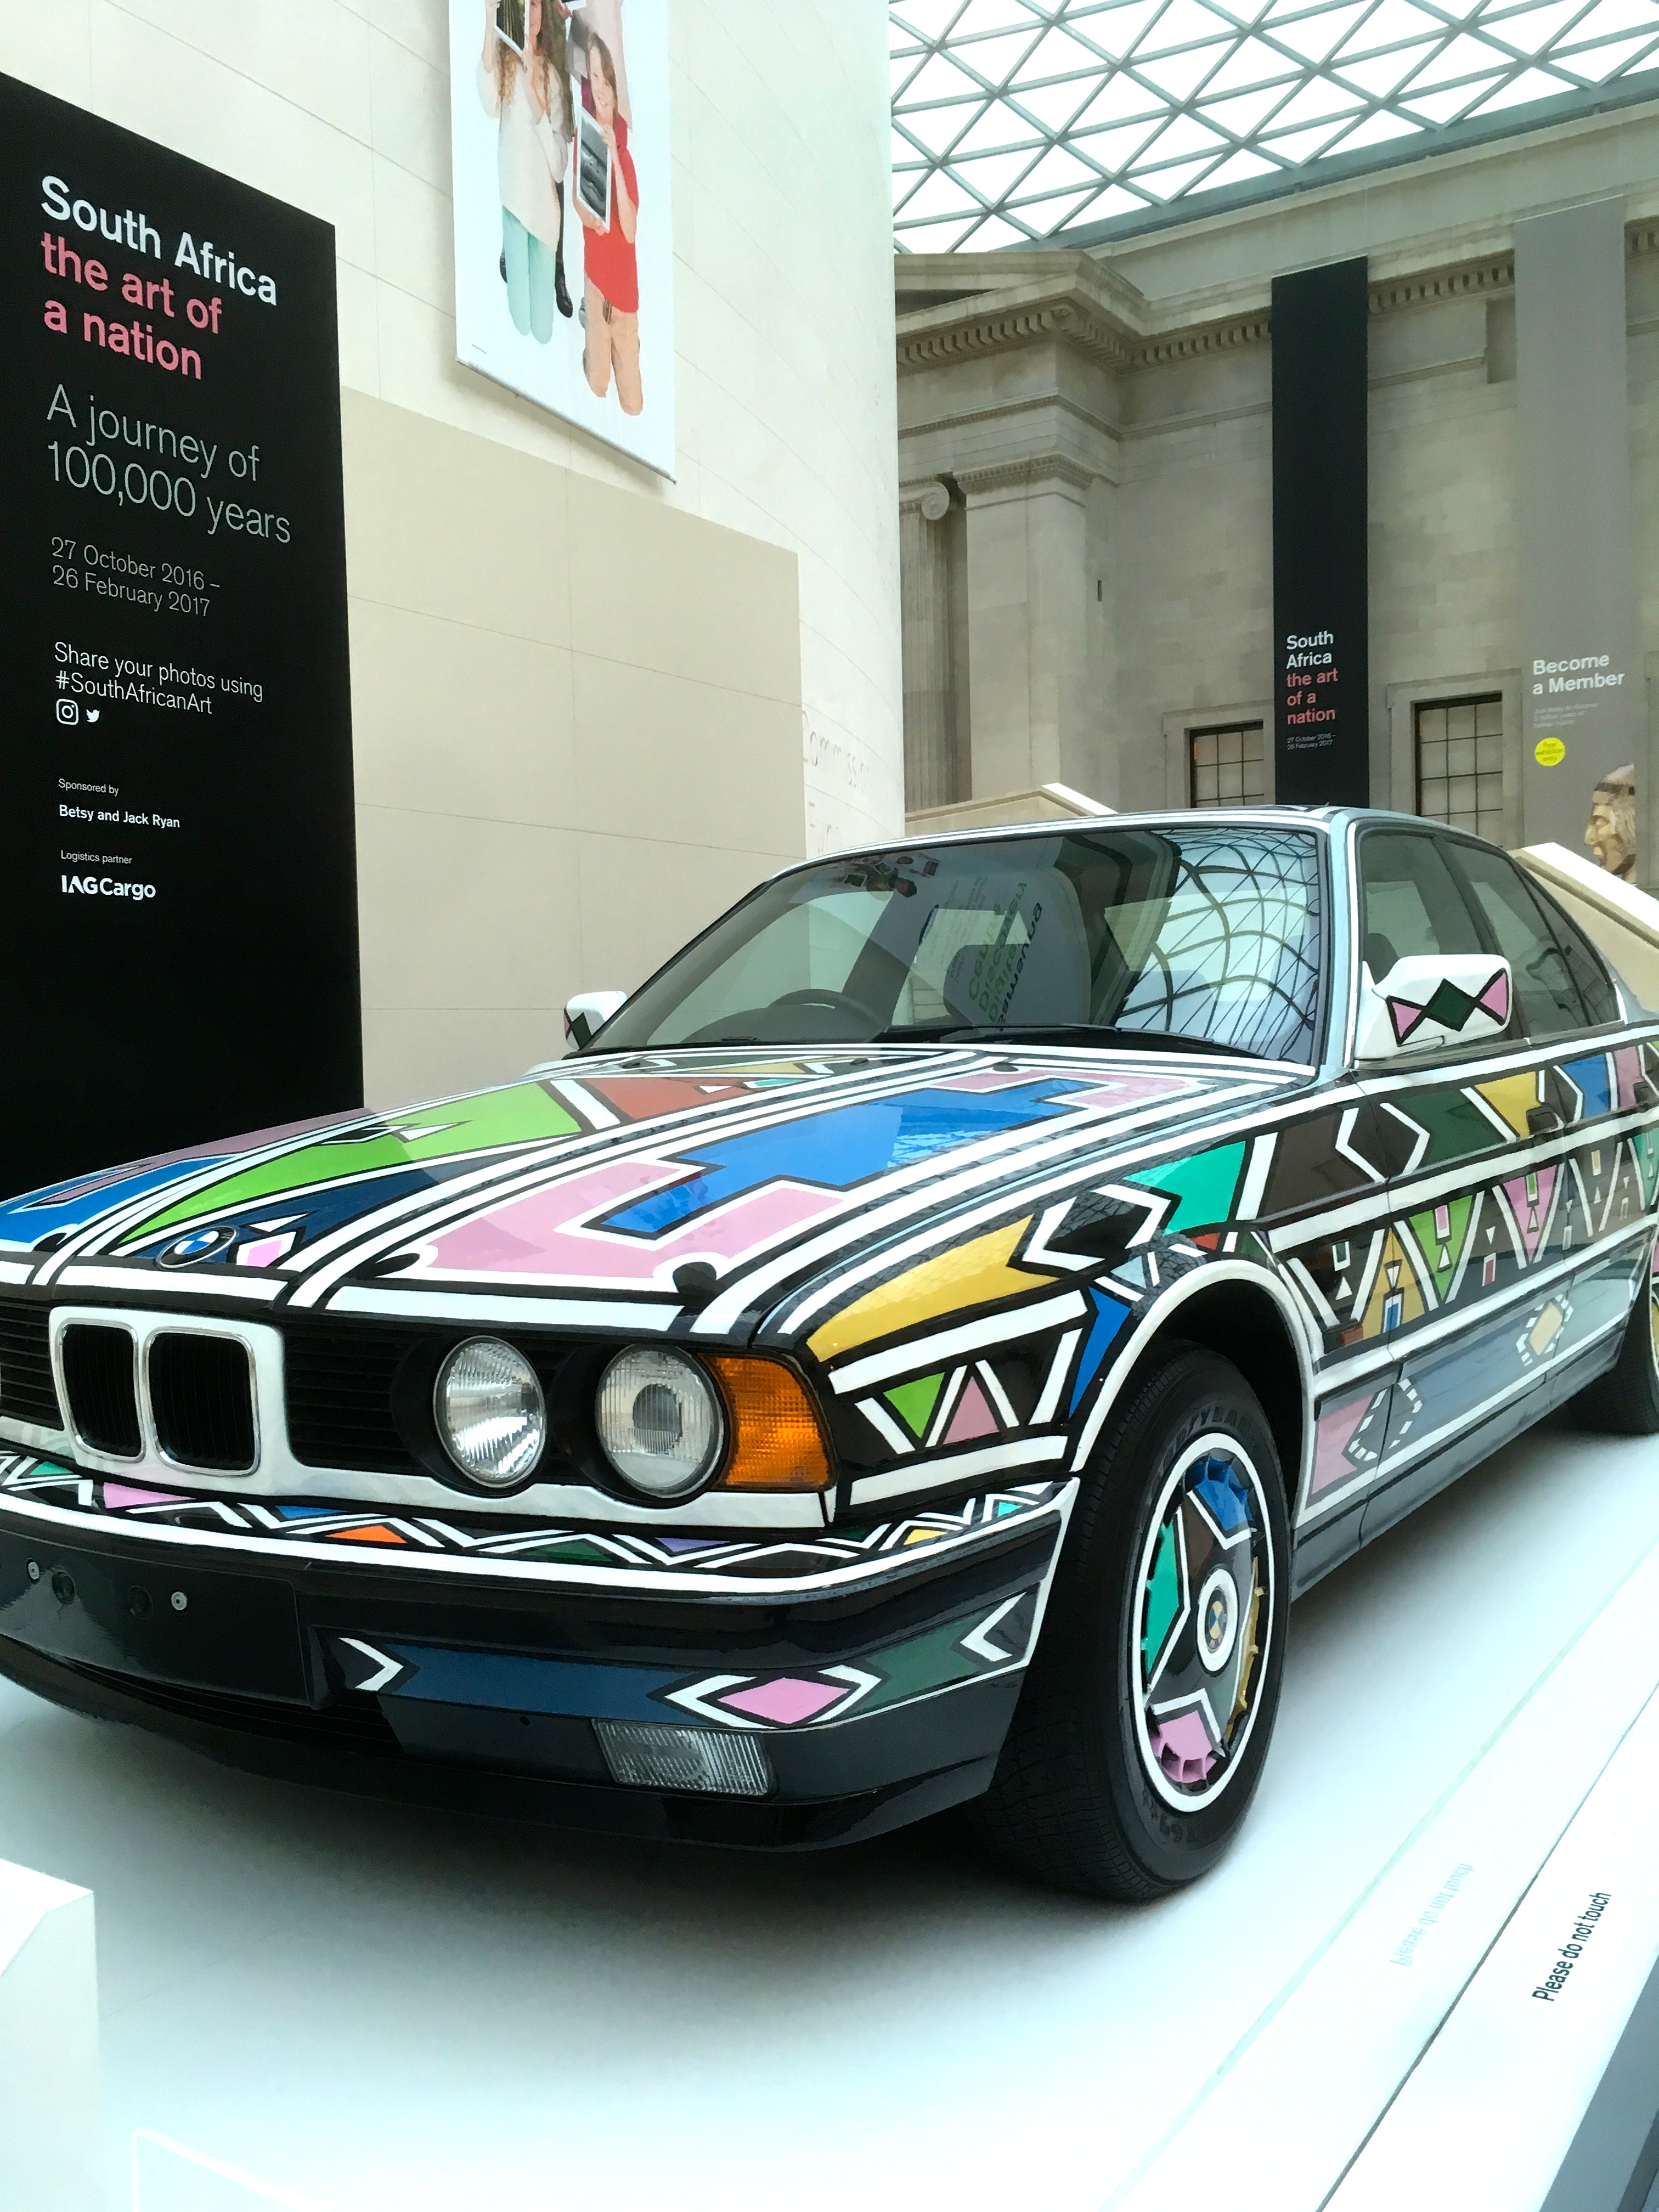 Car transformed into Ndebele Art